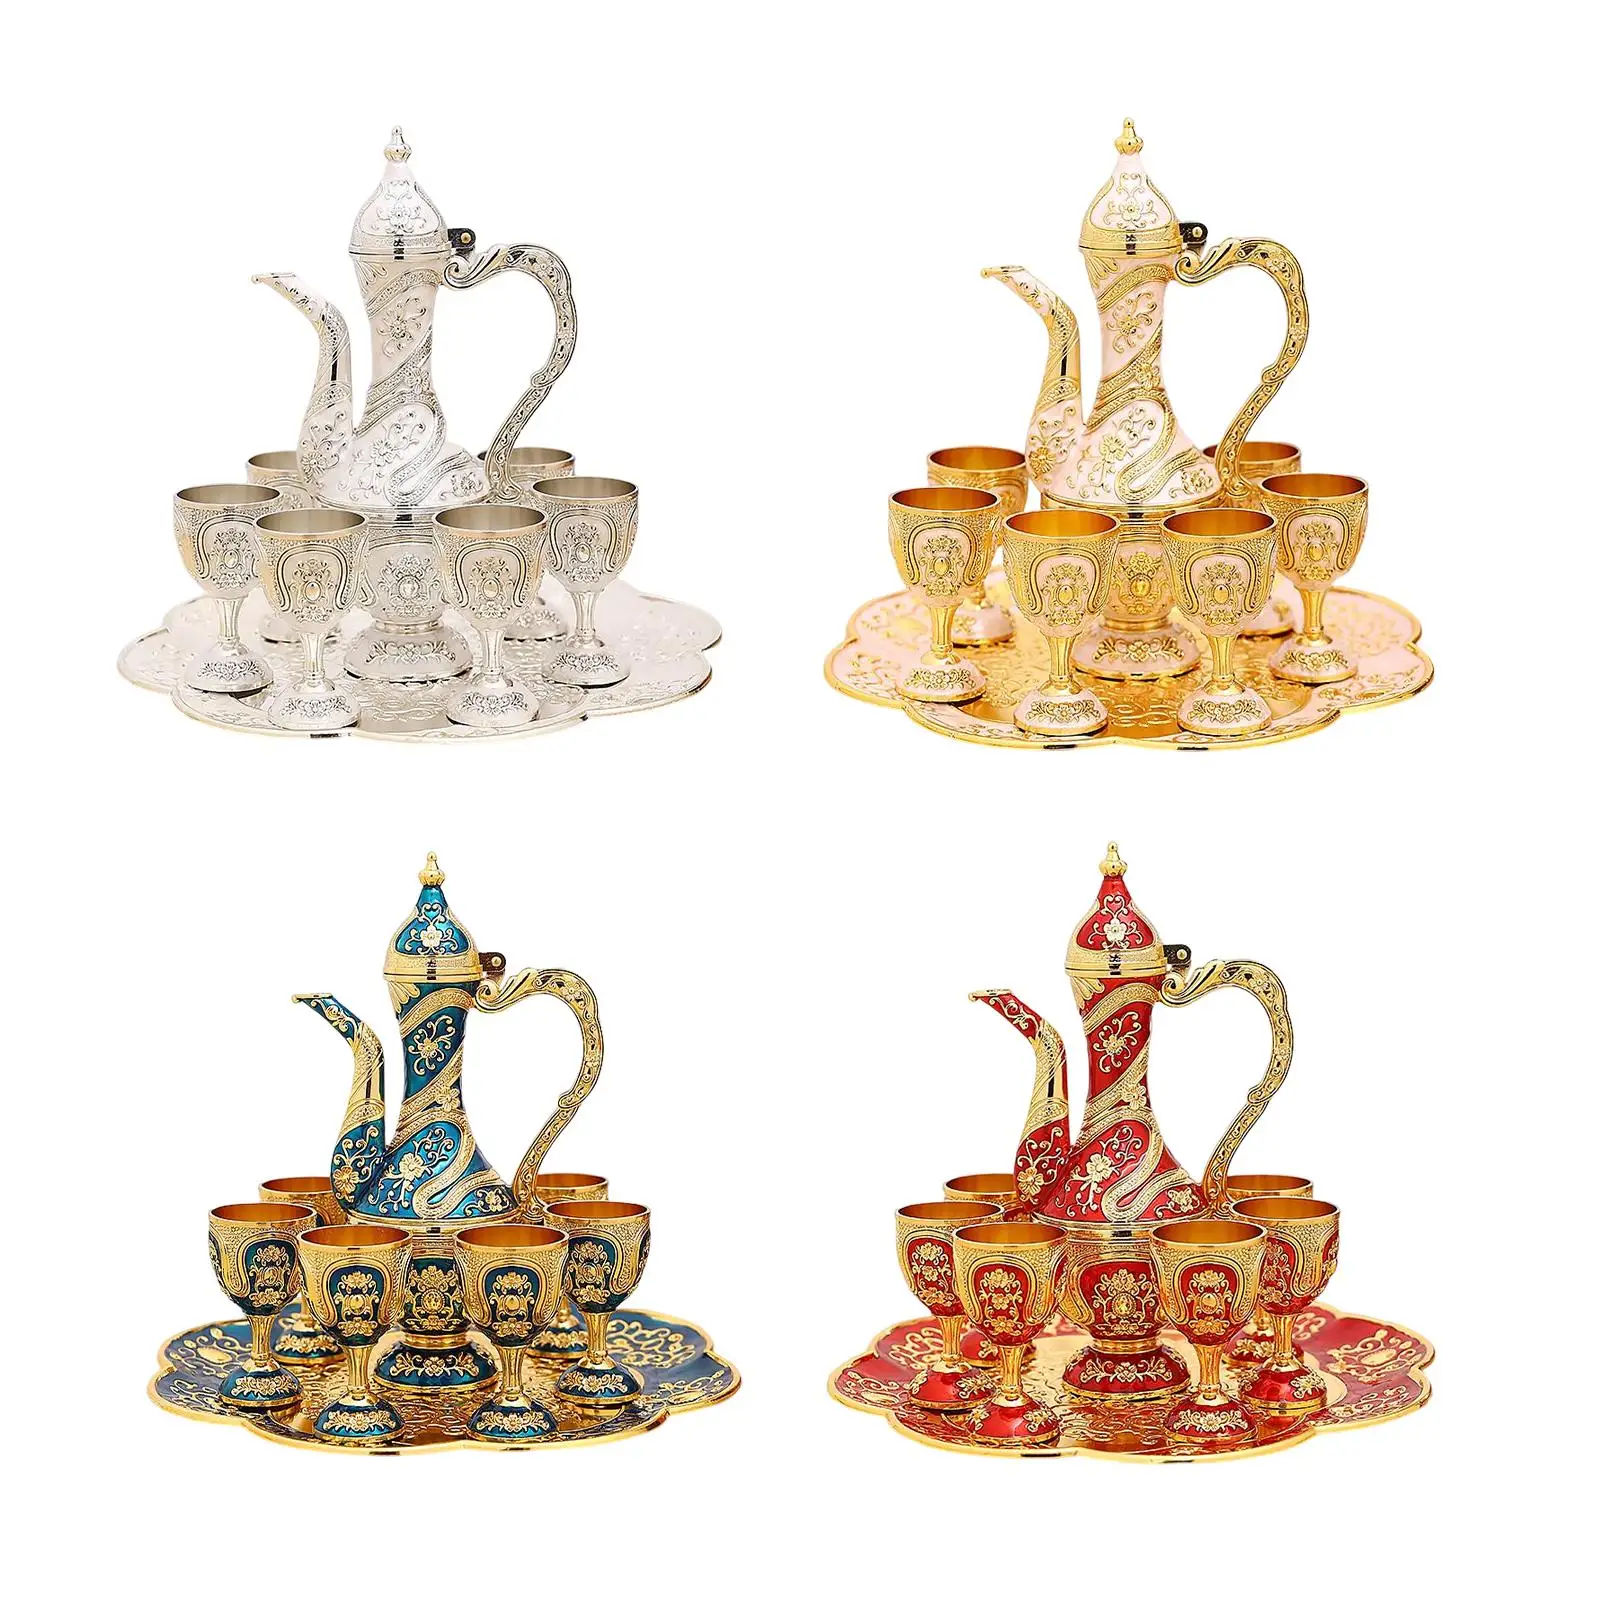 Vintage Turkish Coffee Pot Set with 6 Coffee Cups Tray Teapot Water Serving Set European Flagon Set for Home Decoration Bar